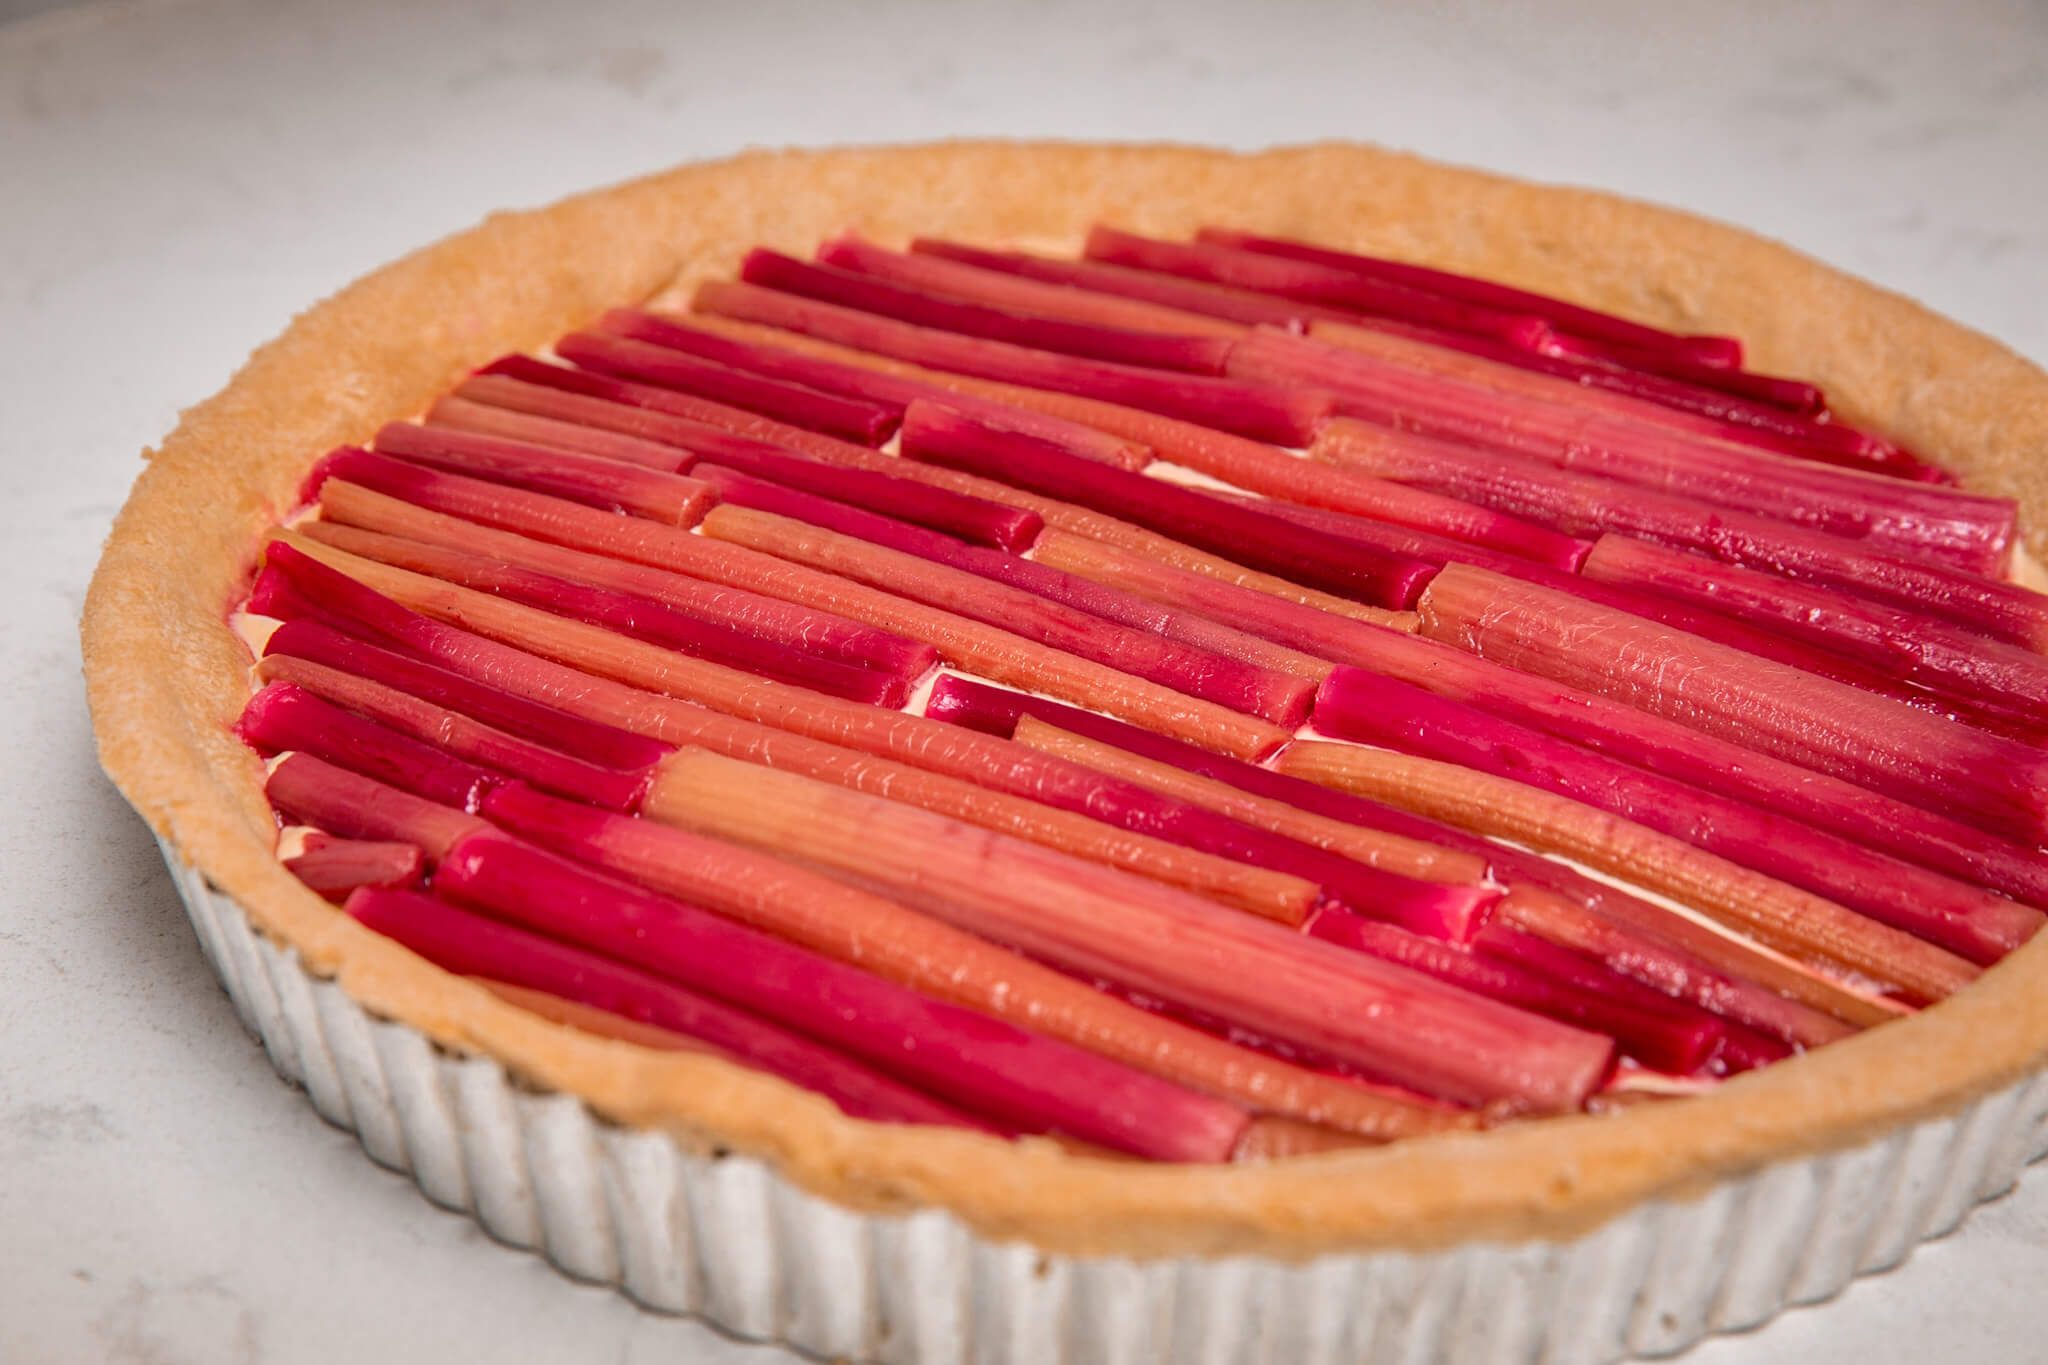 A large tart with pastry cream and topped with rows of rhubarb stems